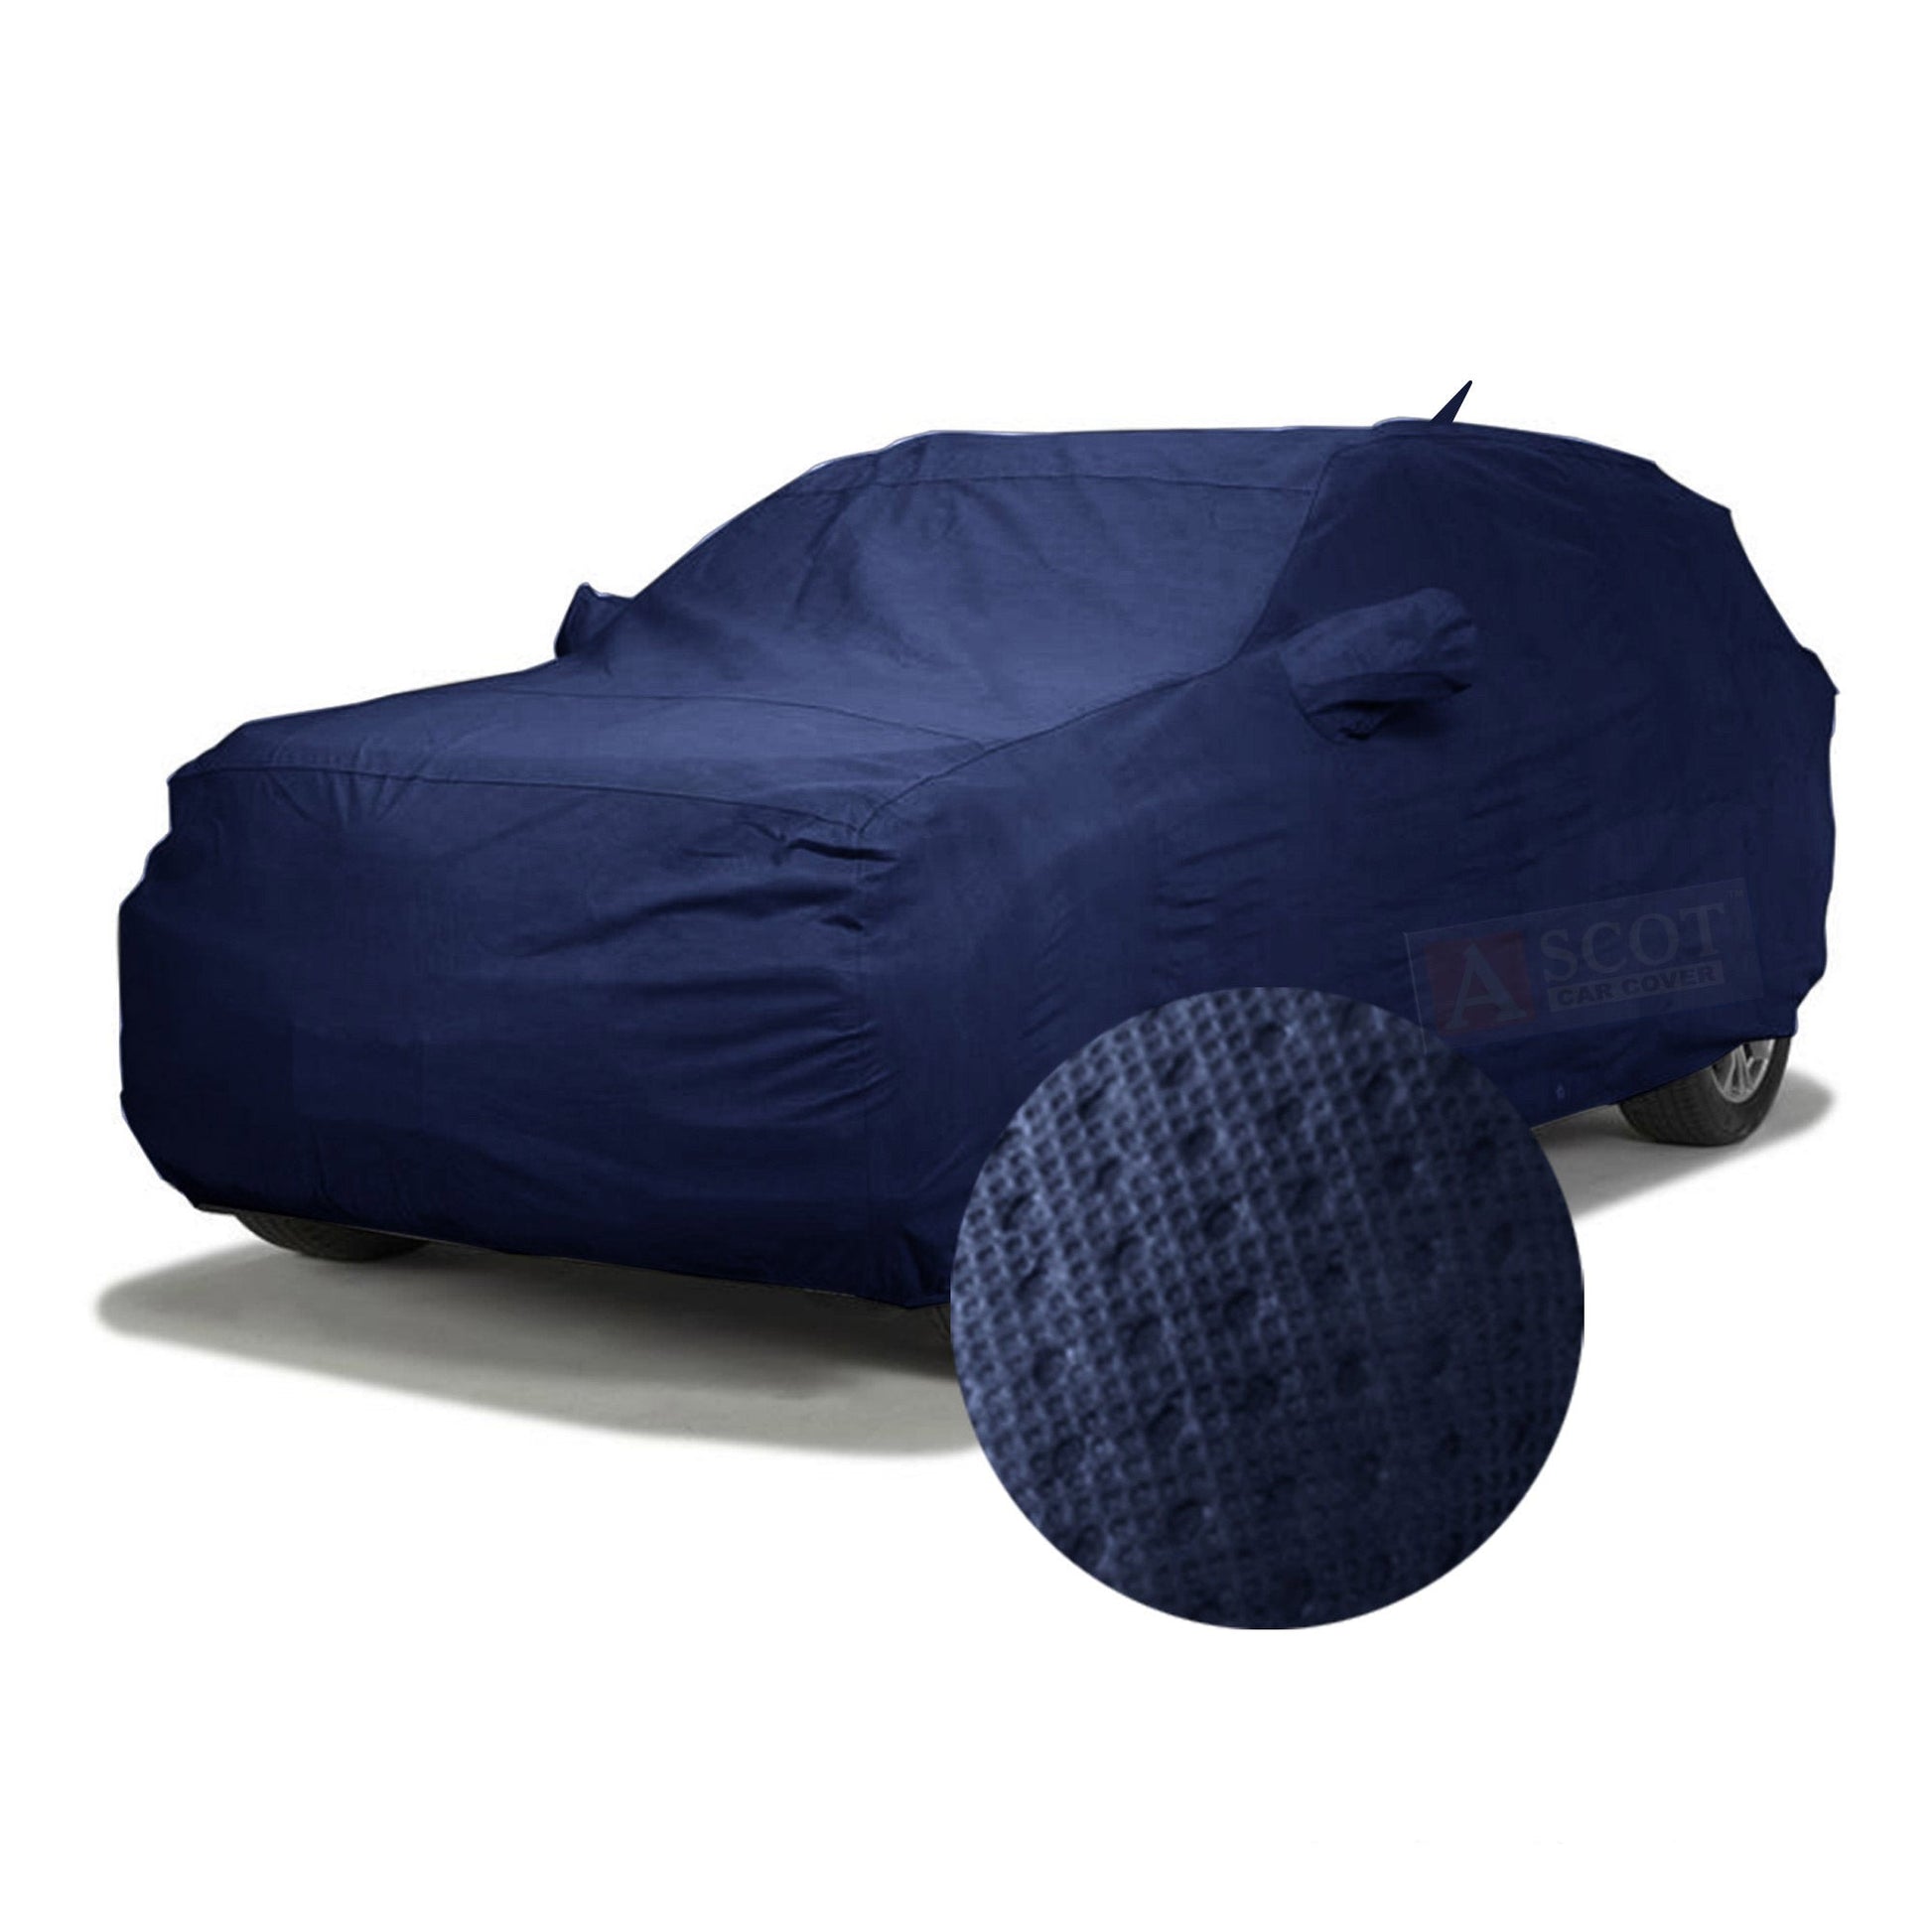 MADAFIYA Royals Choice Car Body Cover Compatible with MG ZS EV car Cover, Water Resistant car Cover, Triple Stitched, Protection from  Rain,Snow,UV,Dust